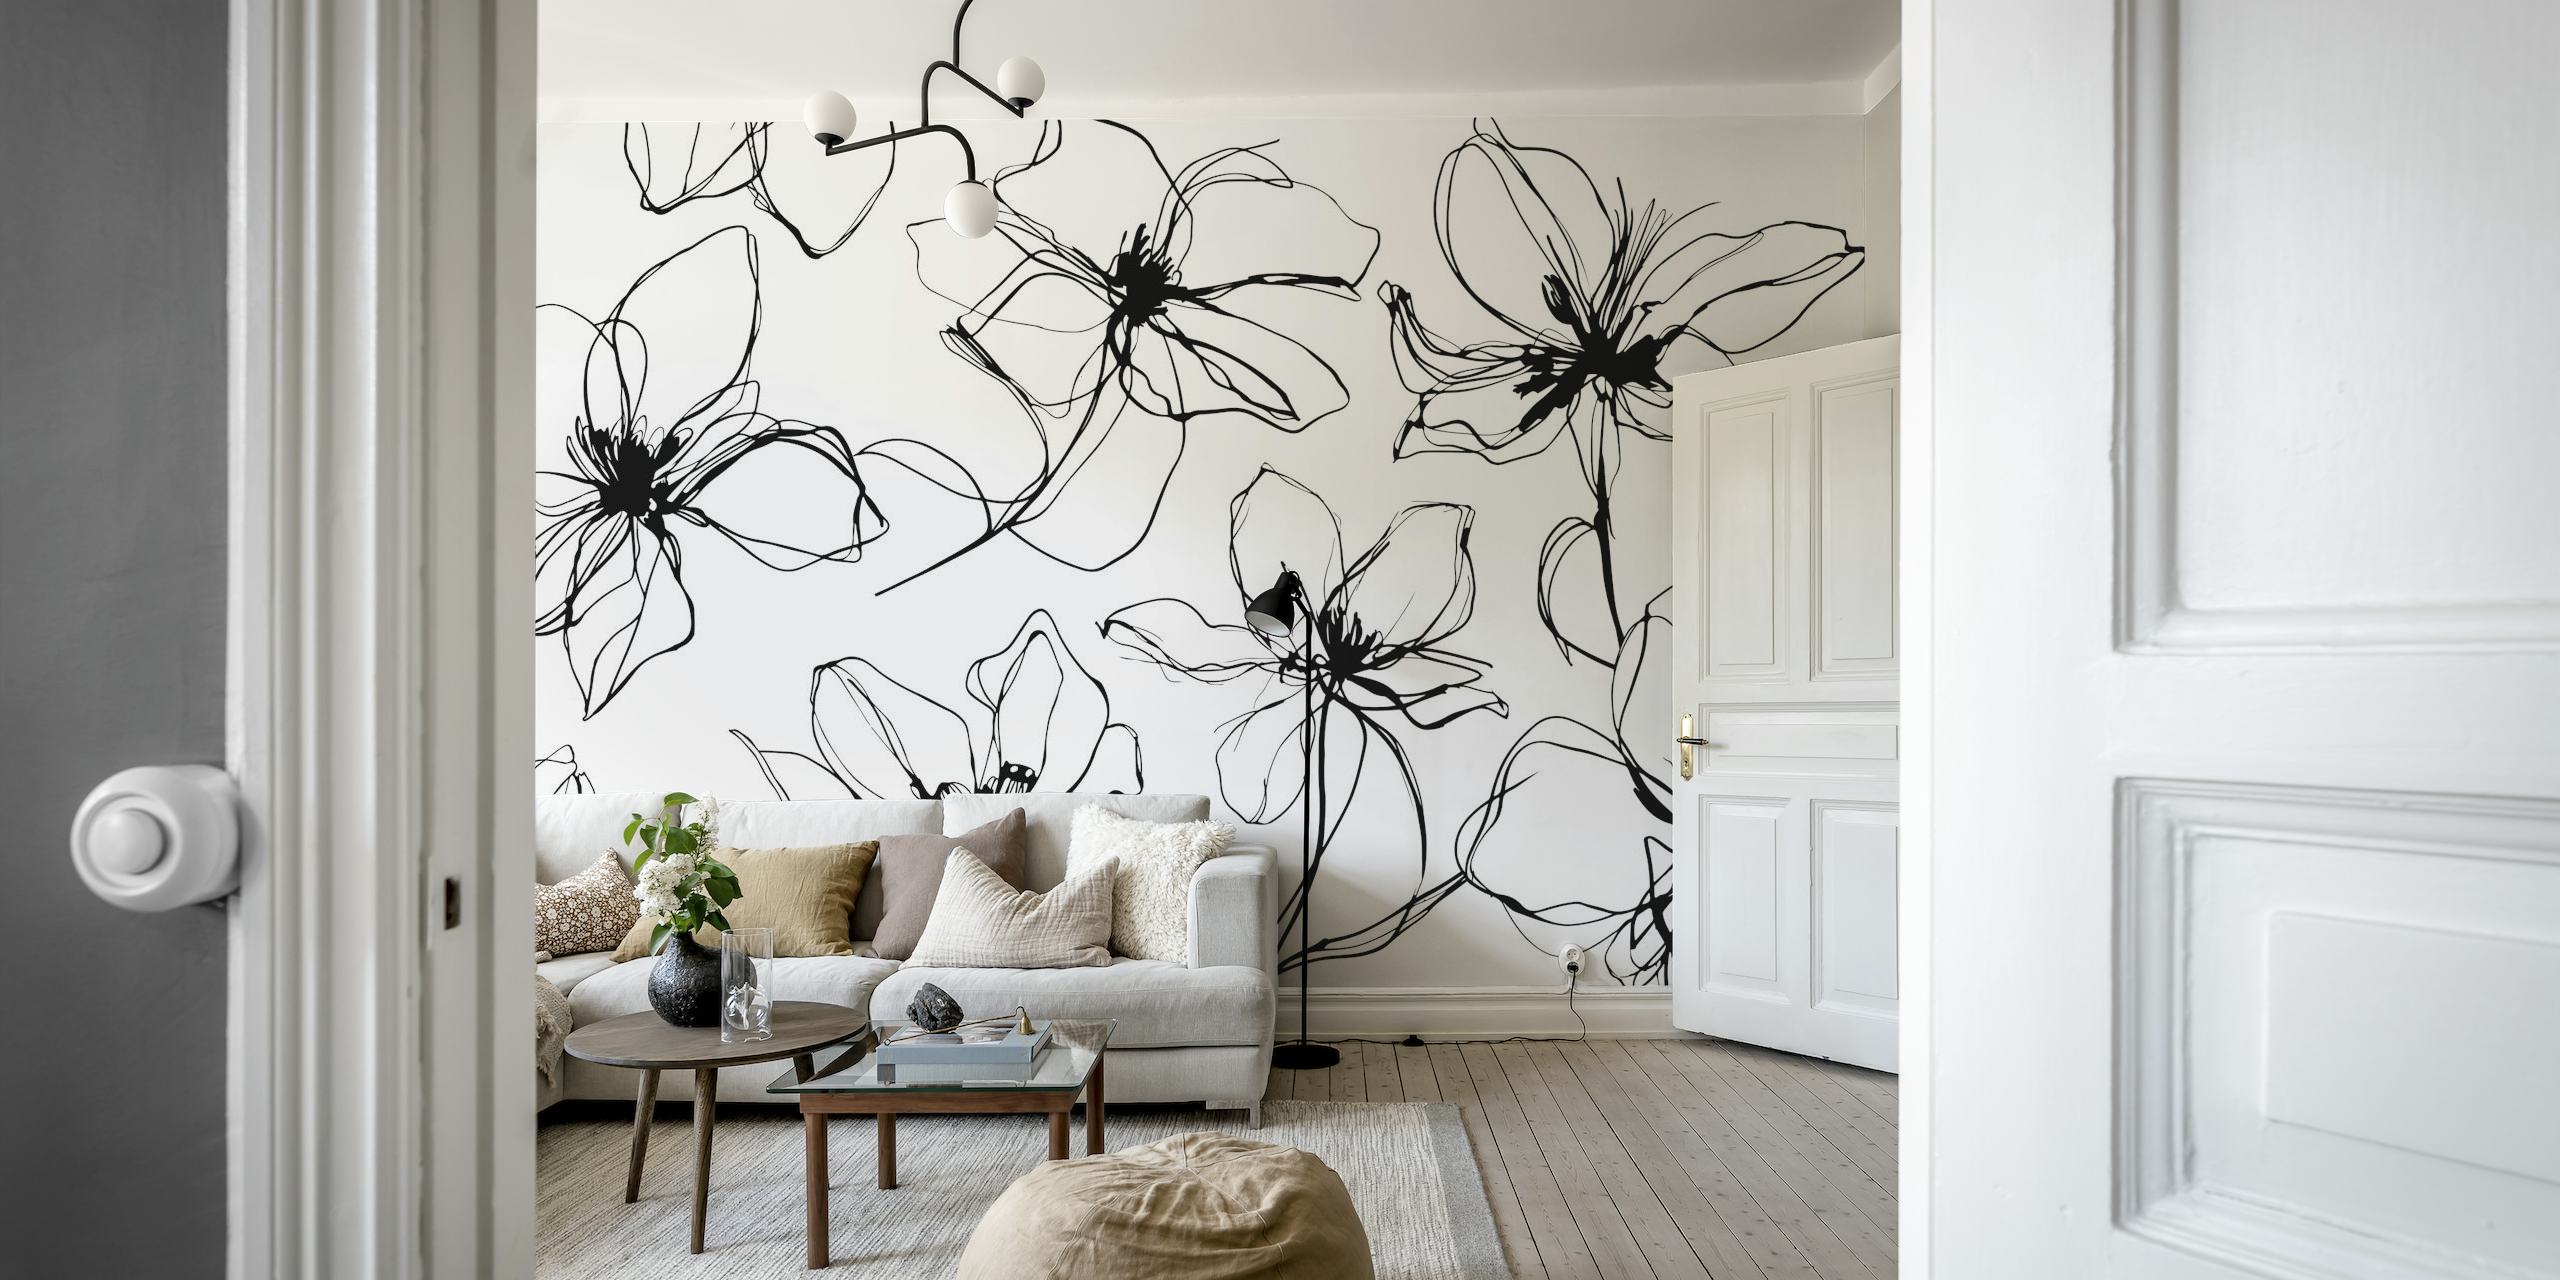 Sketch-style black and white floral pattern wall mural from happywall.com